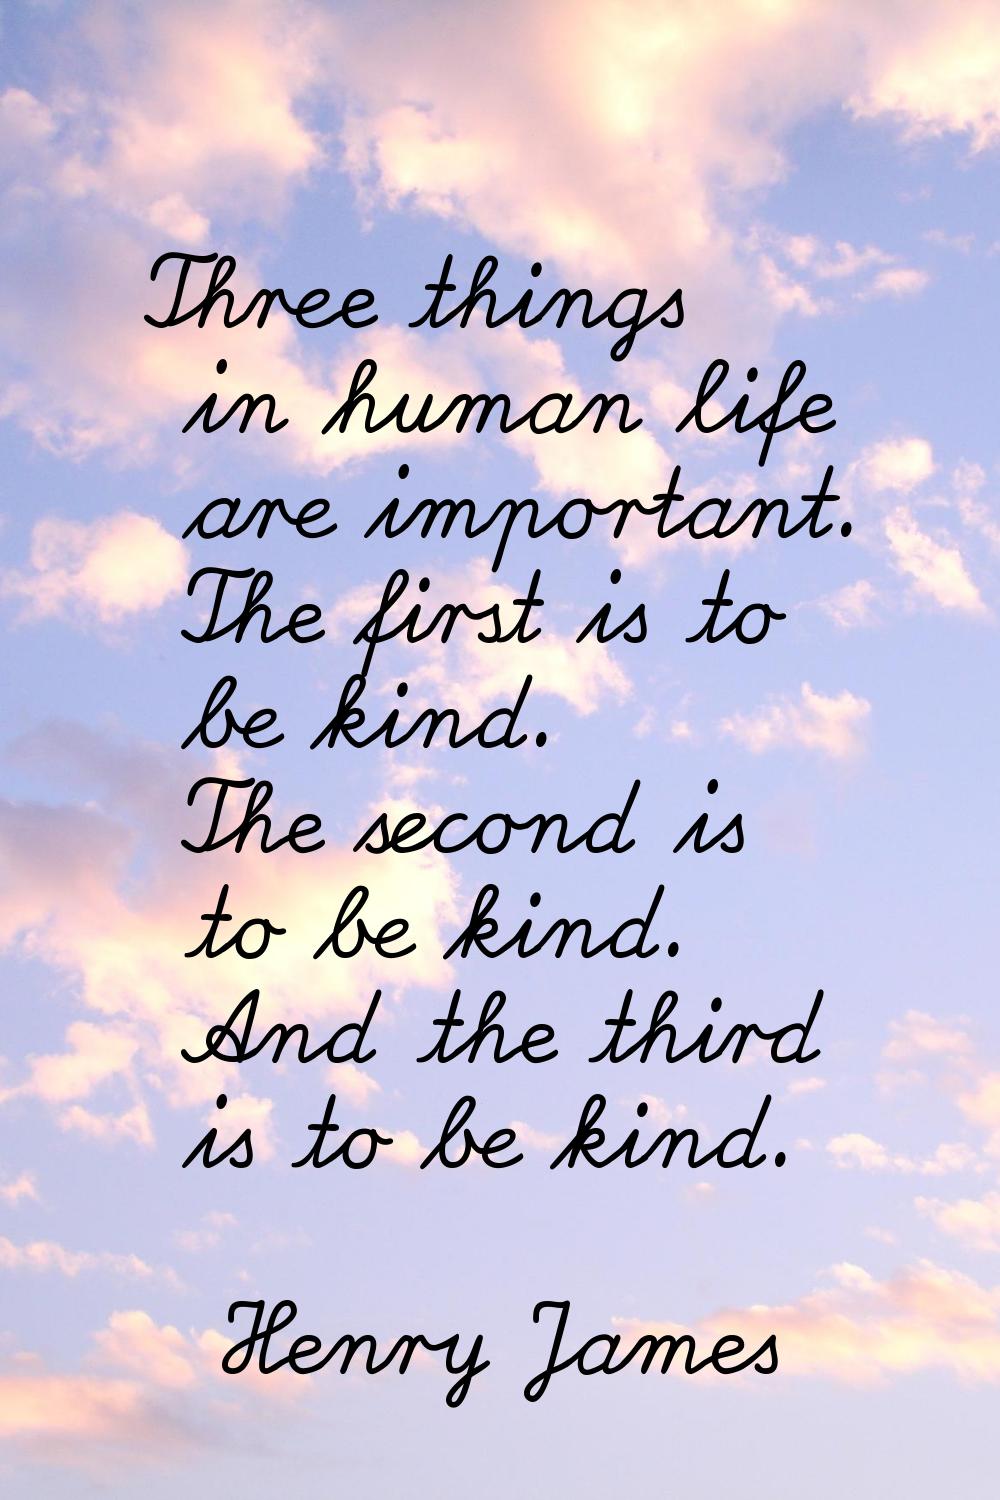 Three things in human life are important. The first is to be kind. The second is to be kind. And th